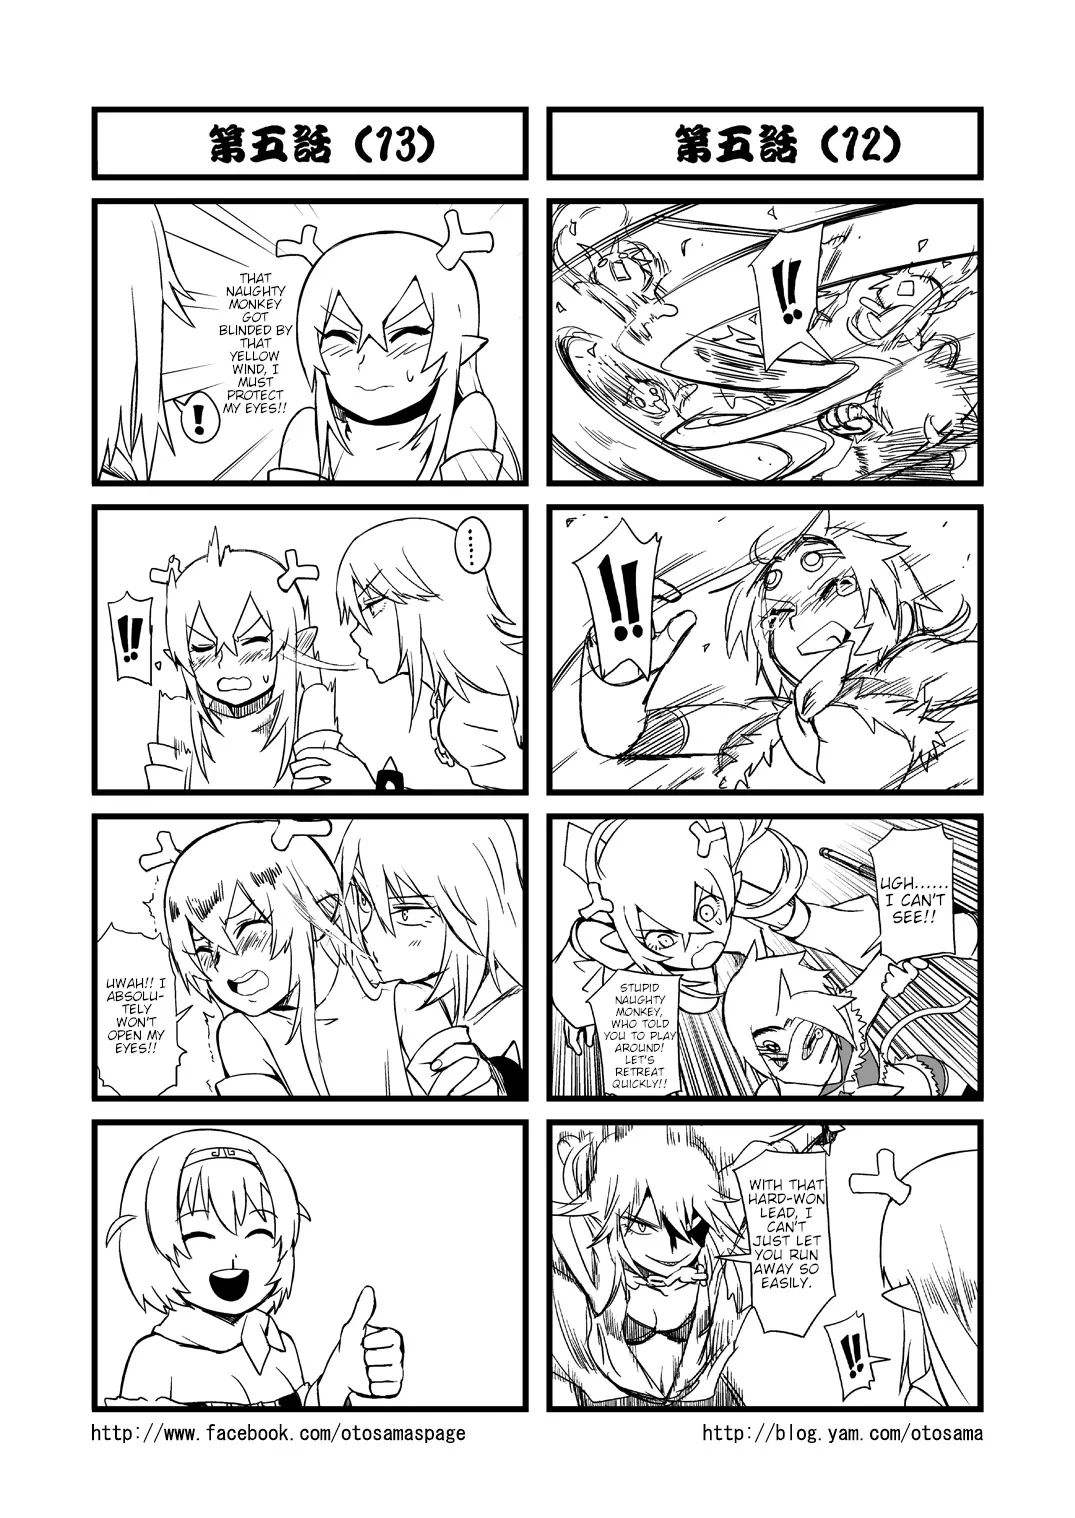 Tang Hill Burial - Journey To The West Irresponsible Anything Goes Edition - 5 page 7